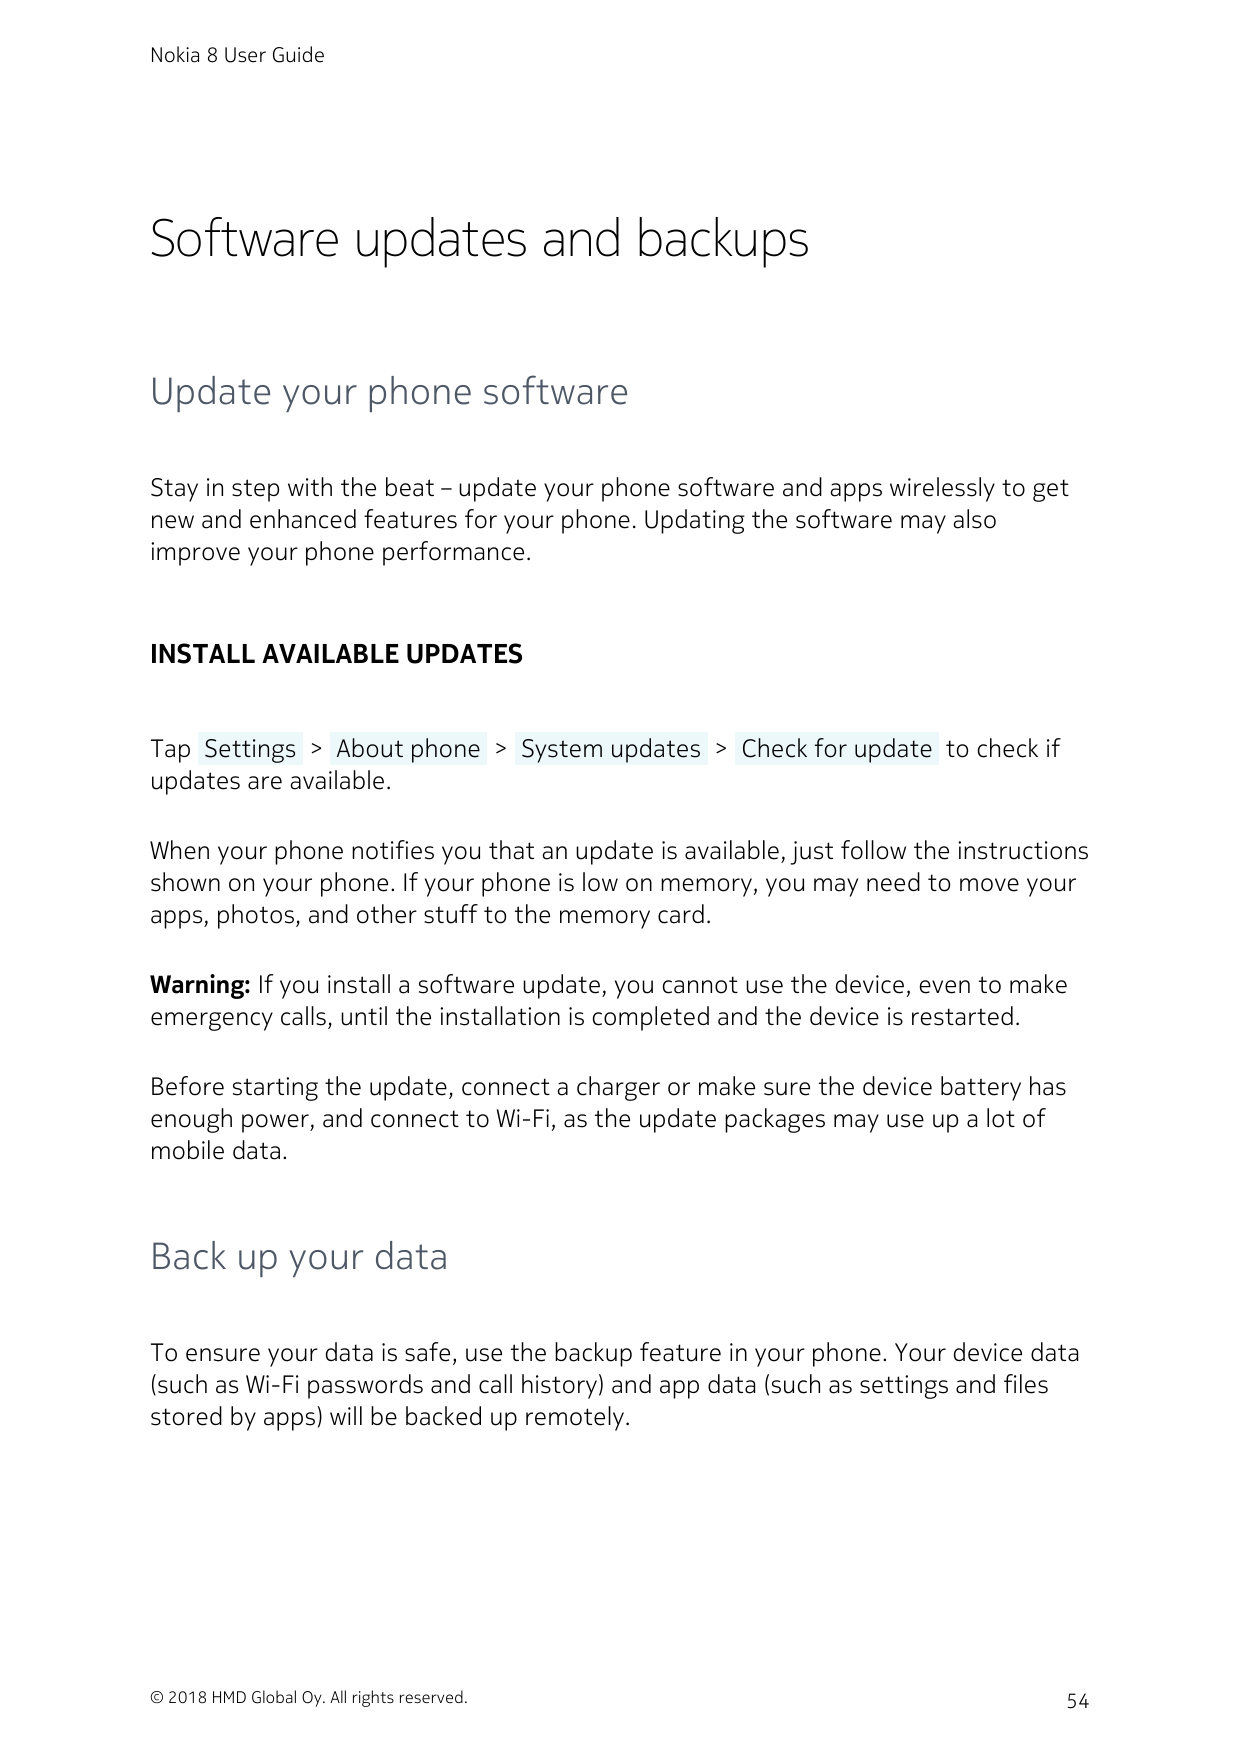 Nokia 8 User GuideSoftware updates and backupsUpdate your phone softwareStay in step with the beat – update your phone software 